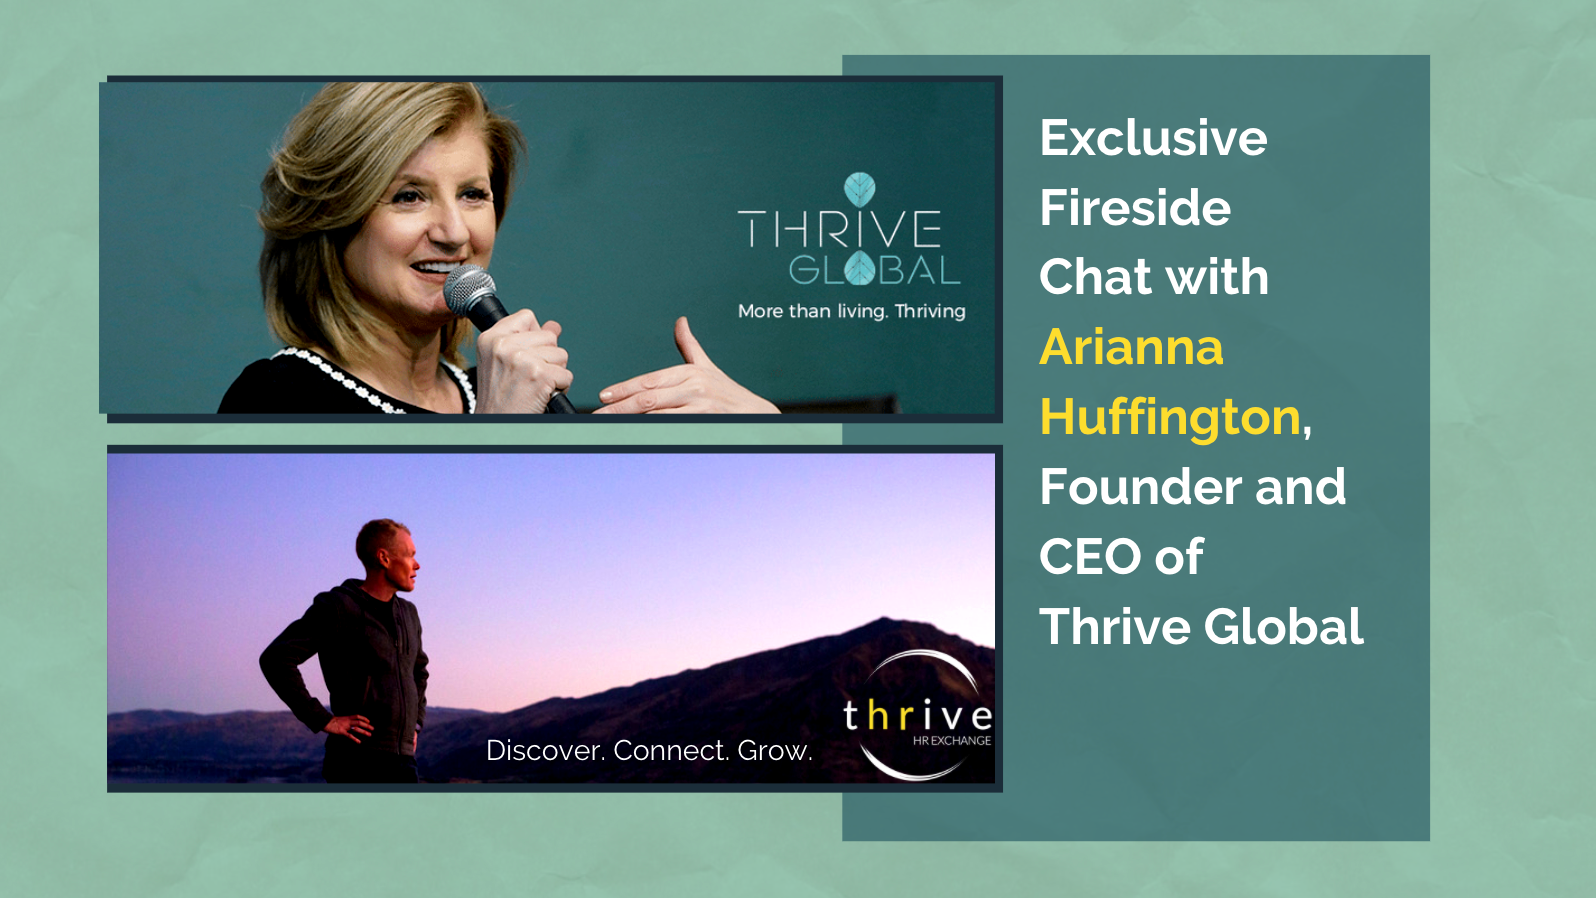 An Exclusive Fireside Chat with Arianna Huffington